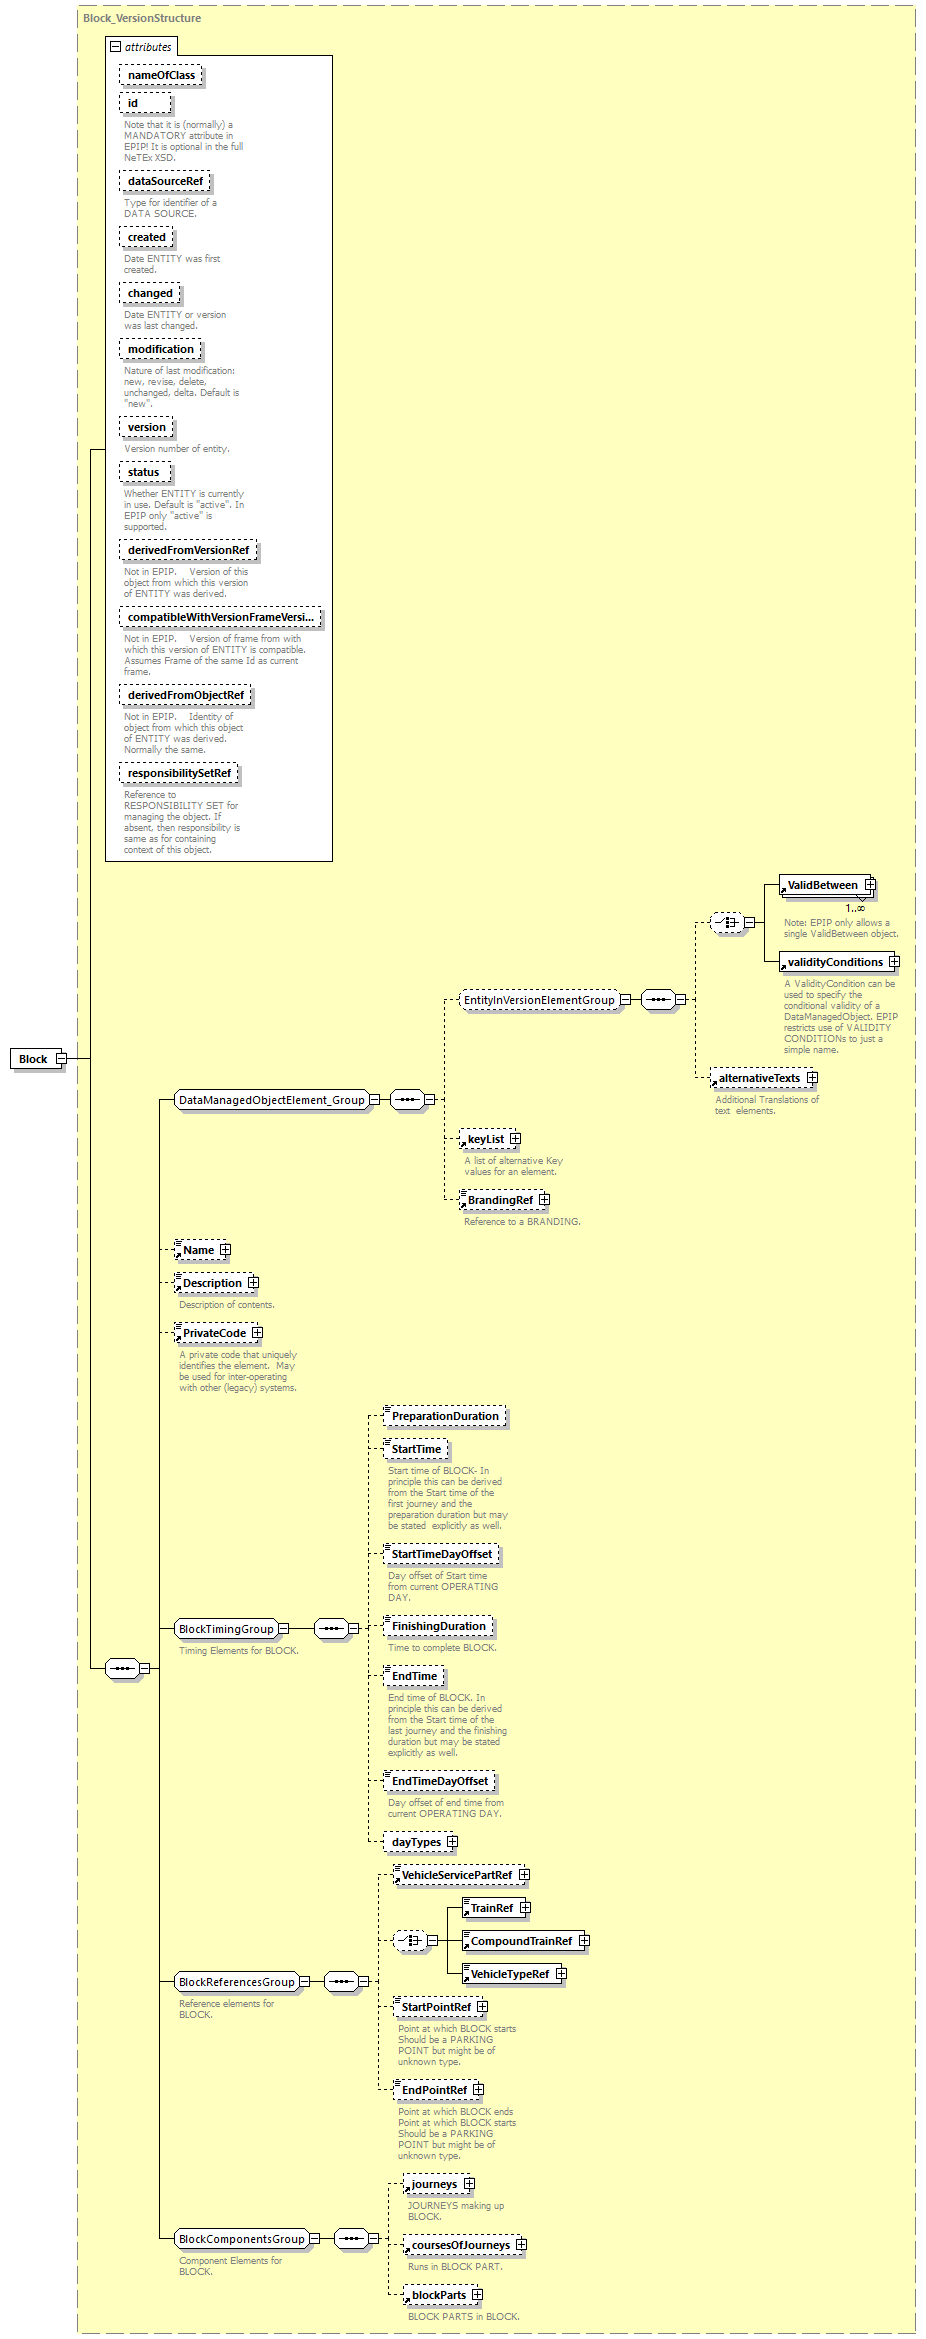 reduced_diagrams/reduced_p62.png